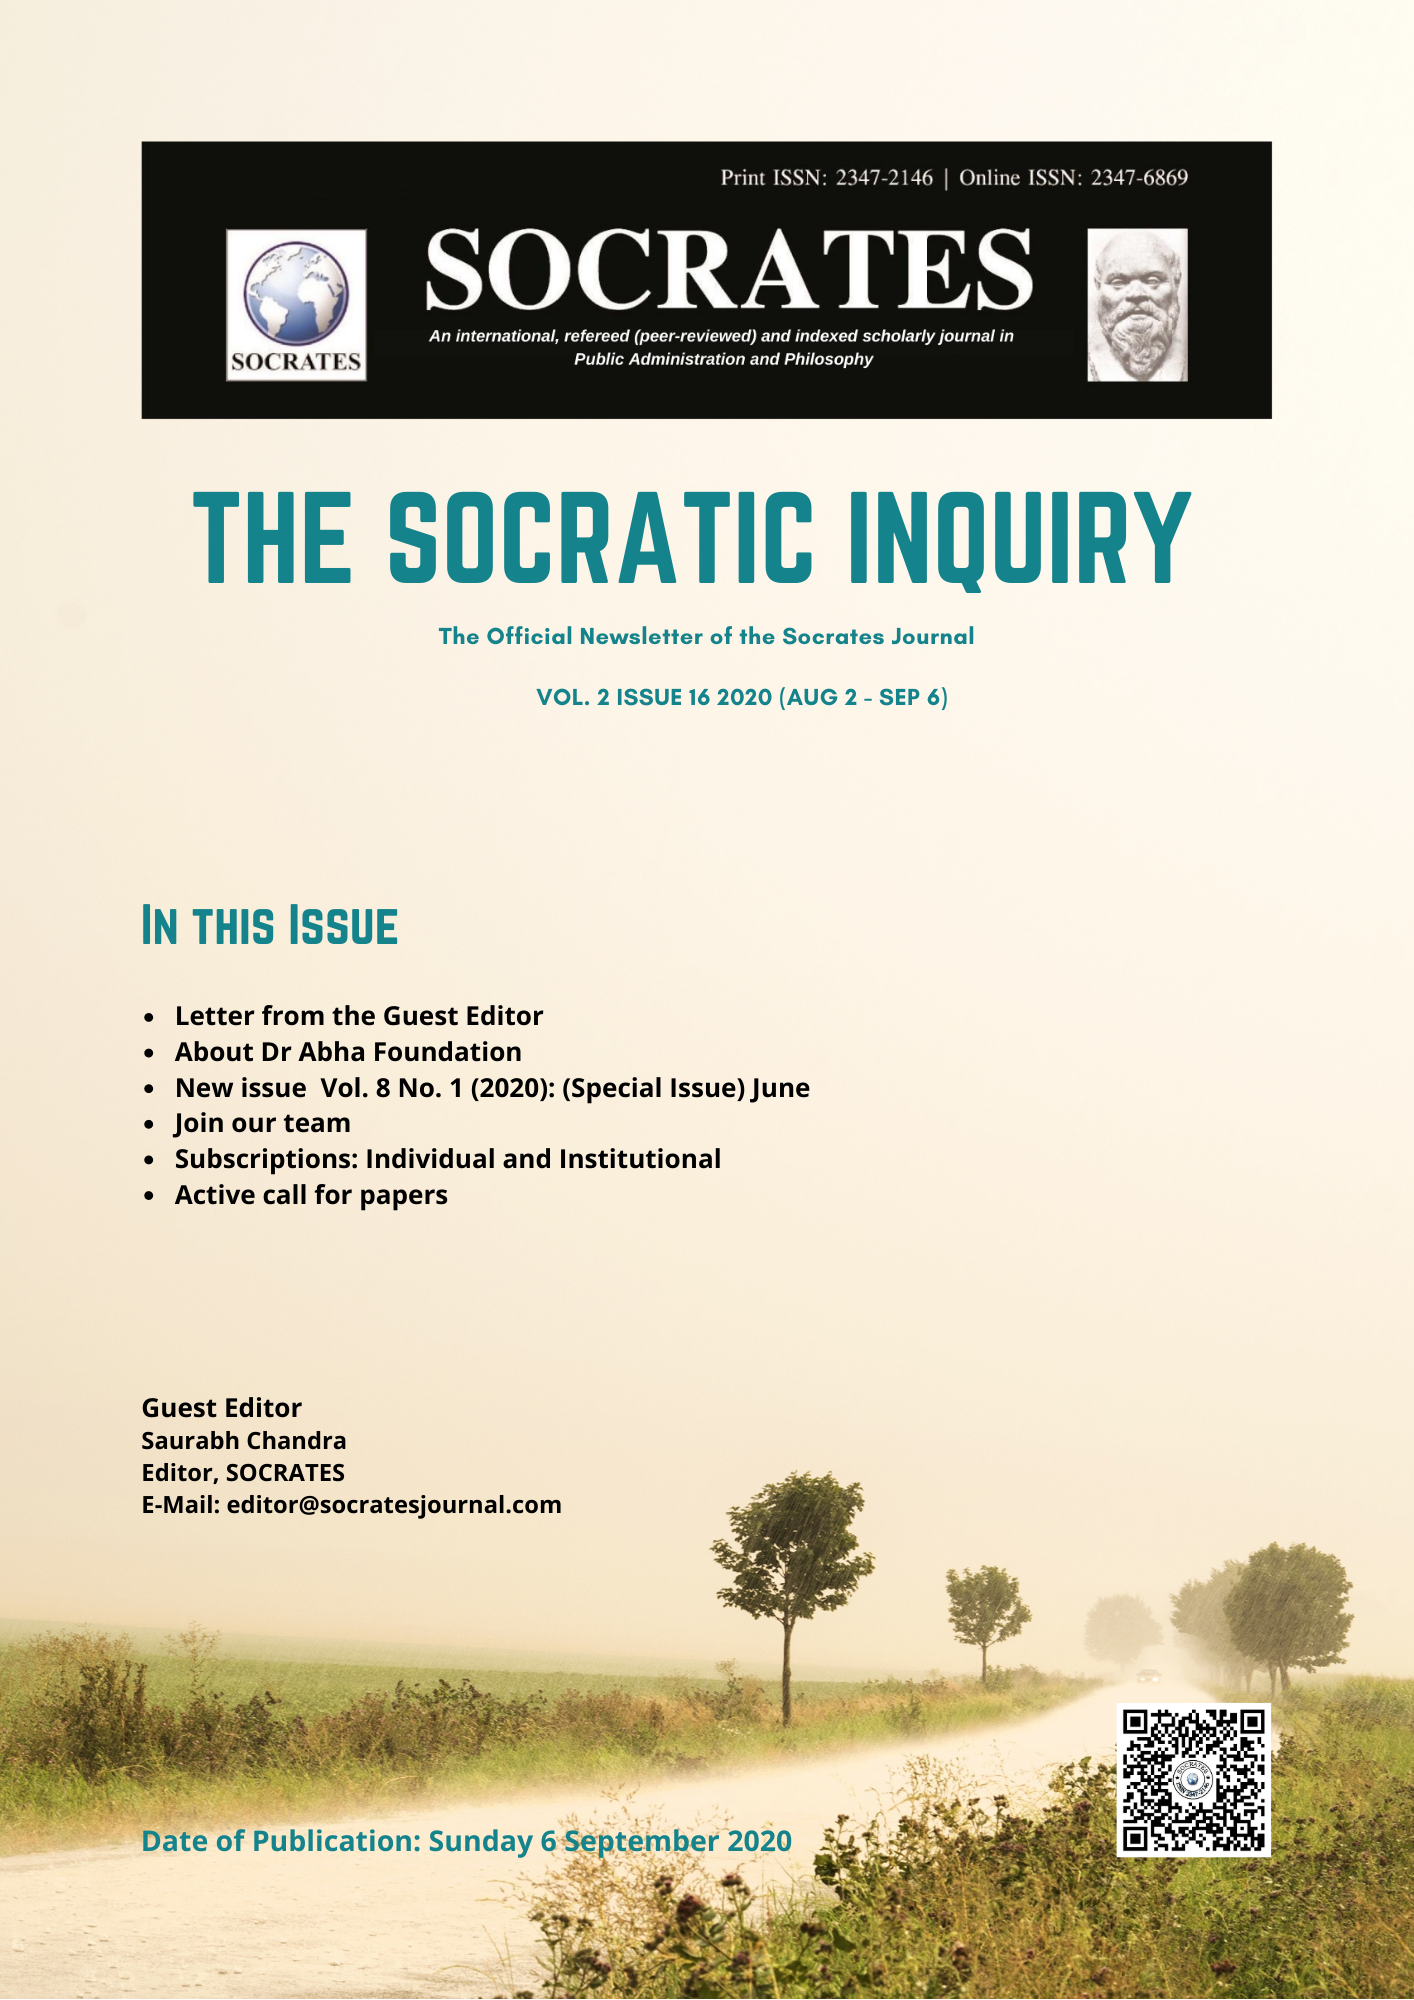 The Socratic Inquiry Newsletter Vol 2 Issue 16 (2020)